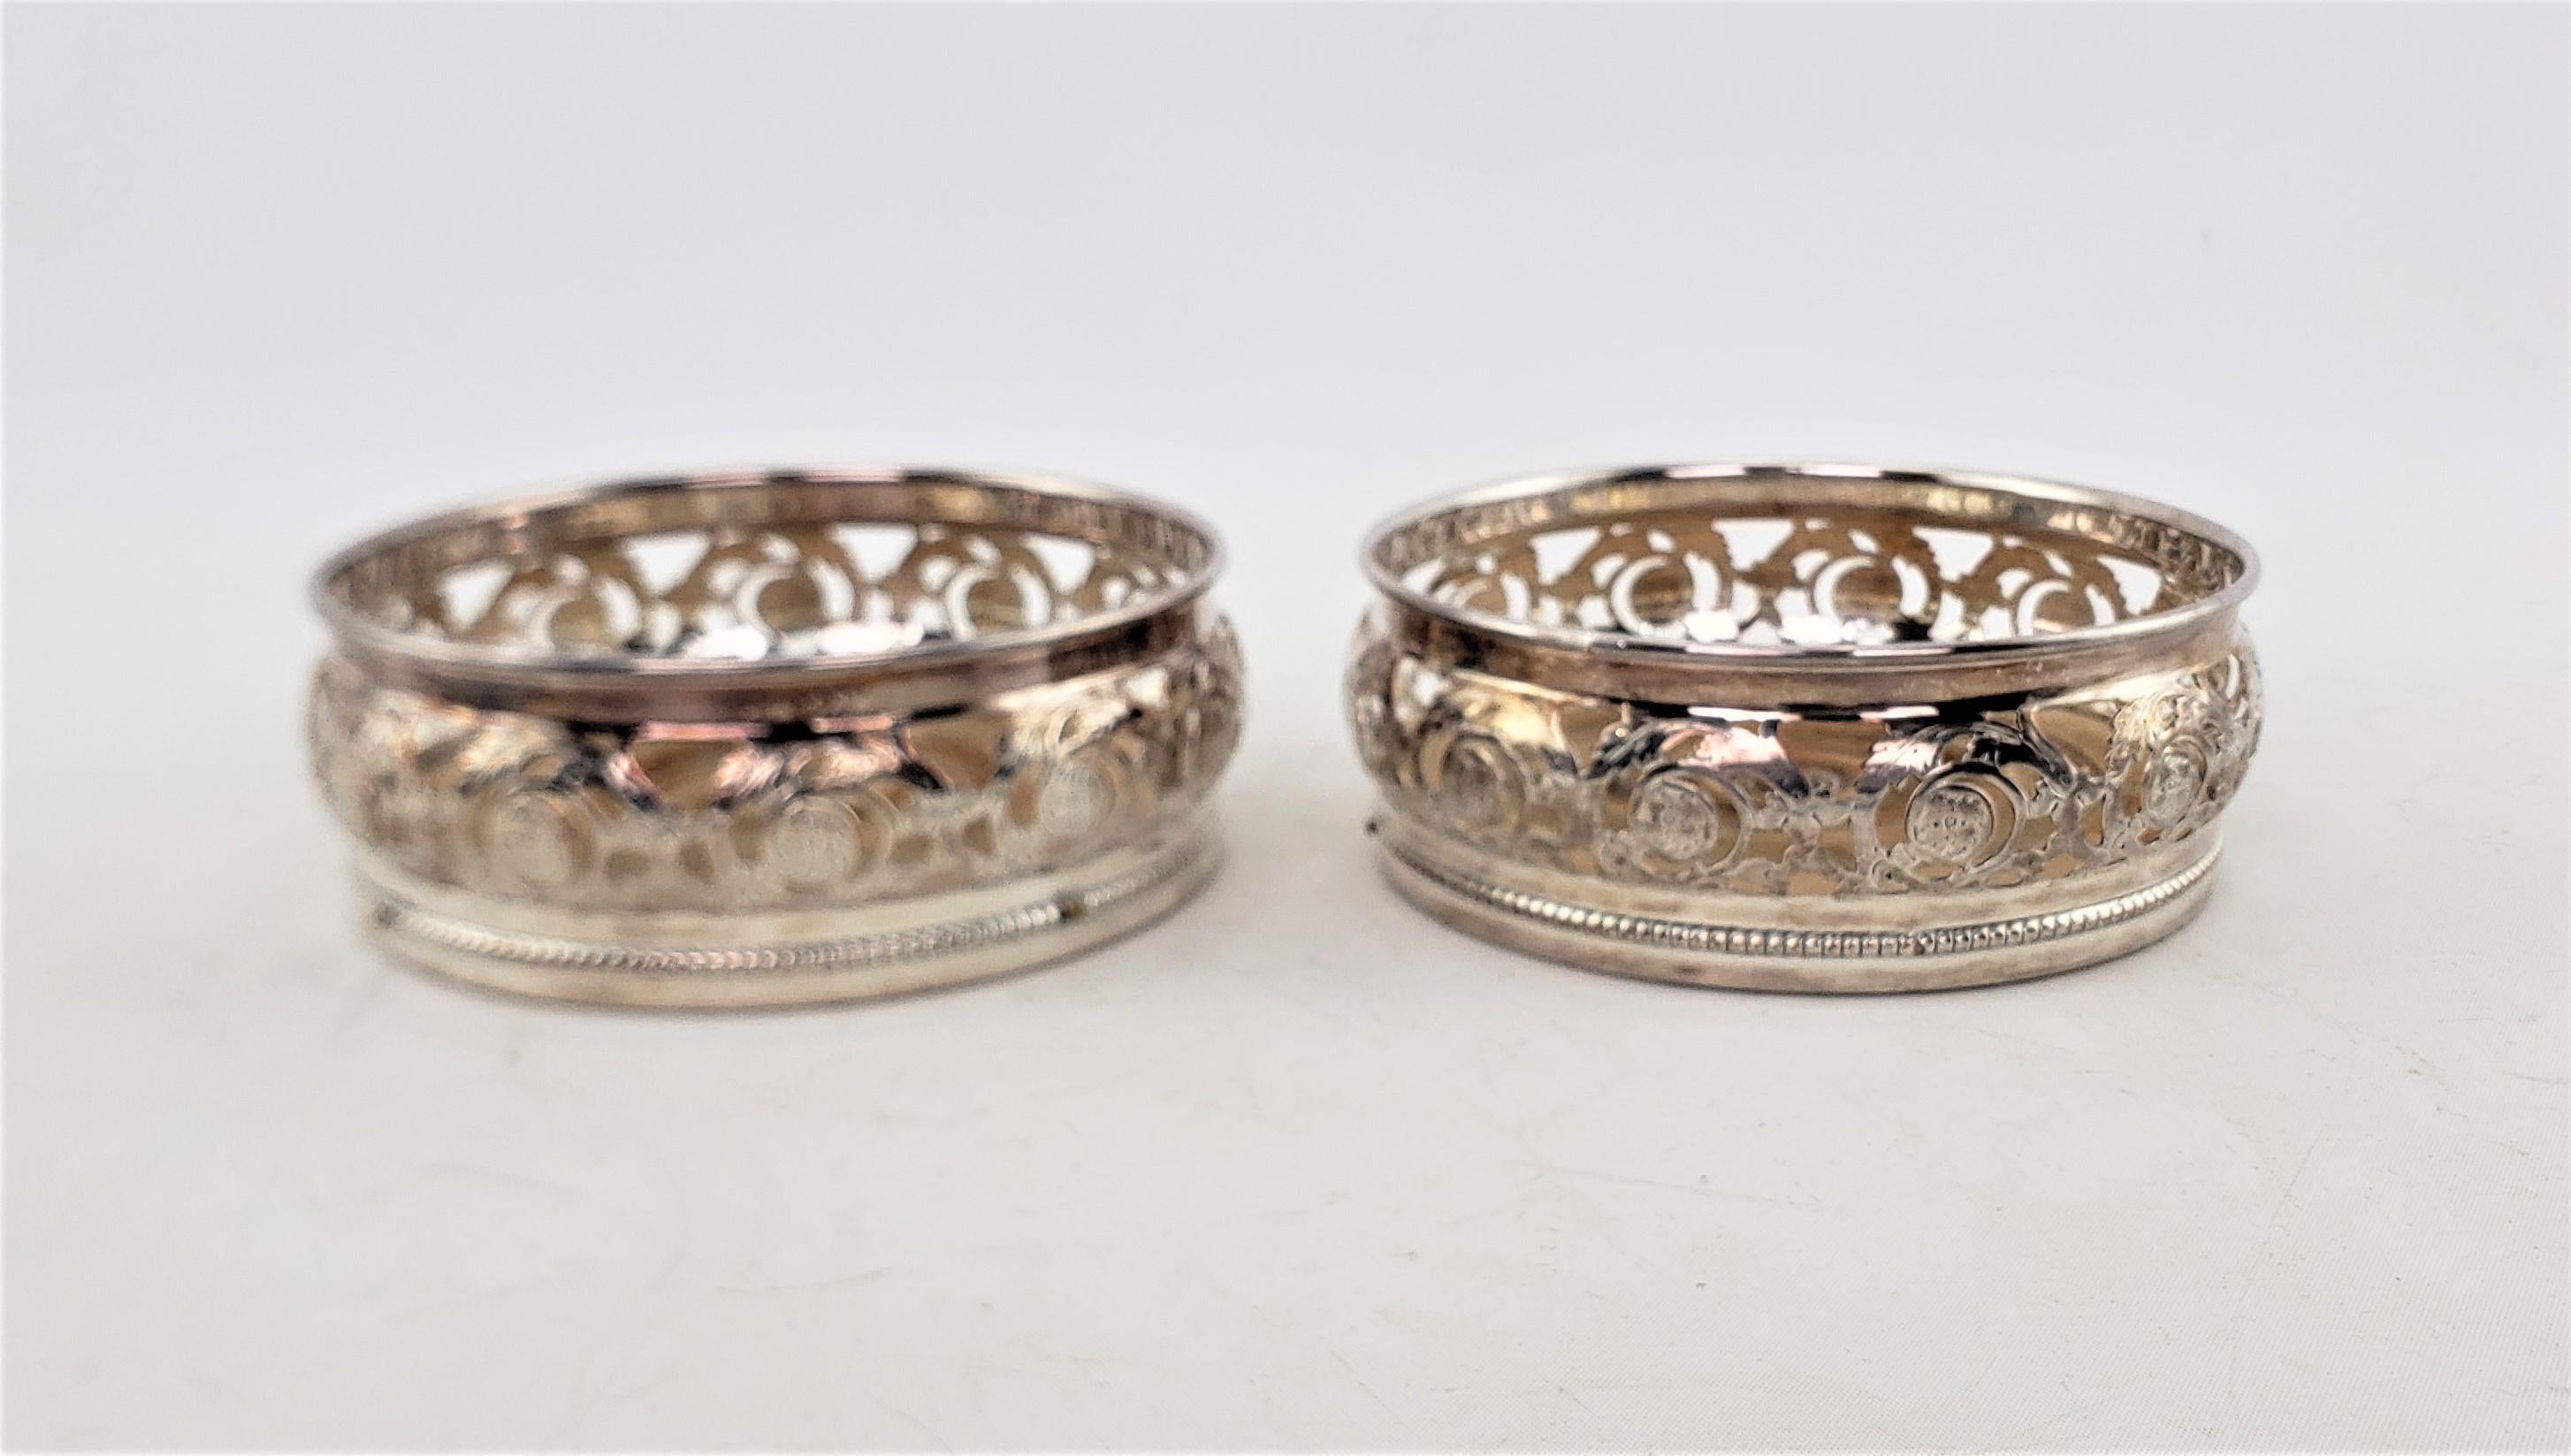 Pair of Antique Silver Plated Bottle Coasters with Floral Engraved Pierced Sides In Good Condition For Sale In Hamilton, Ontario